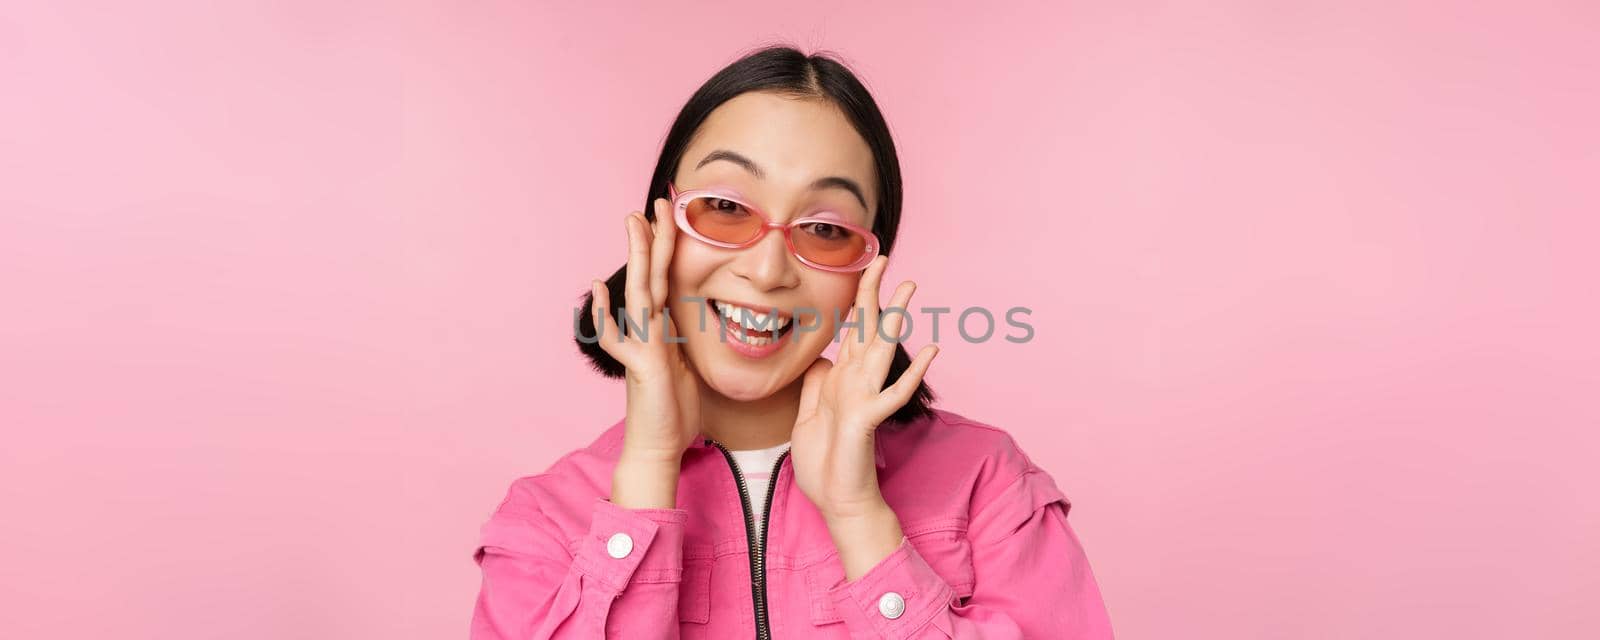 Cute modern japanese girl in sunglasses, smiling and looking happy, posing against pink background in stylish clothing.